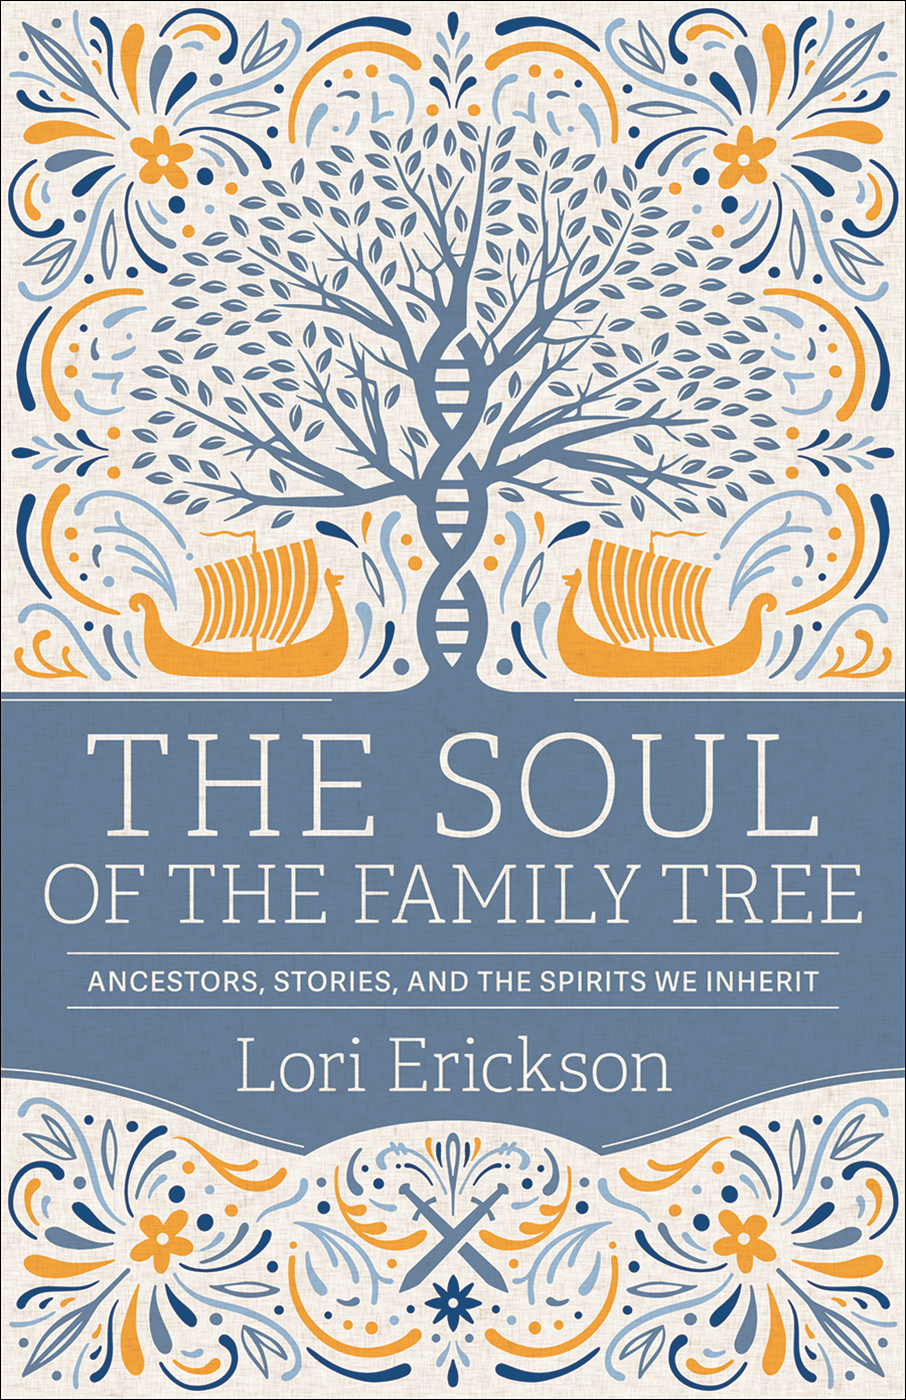 The Soul of the Family Tree